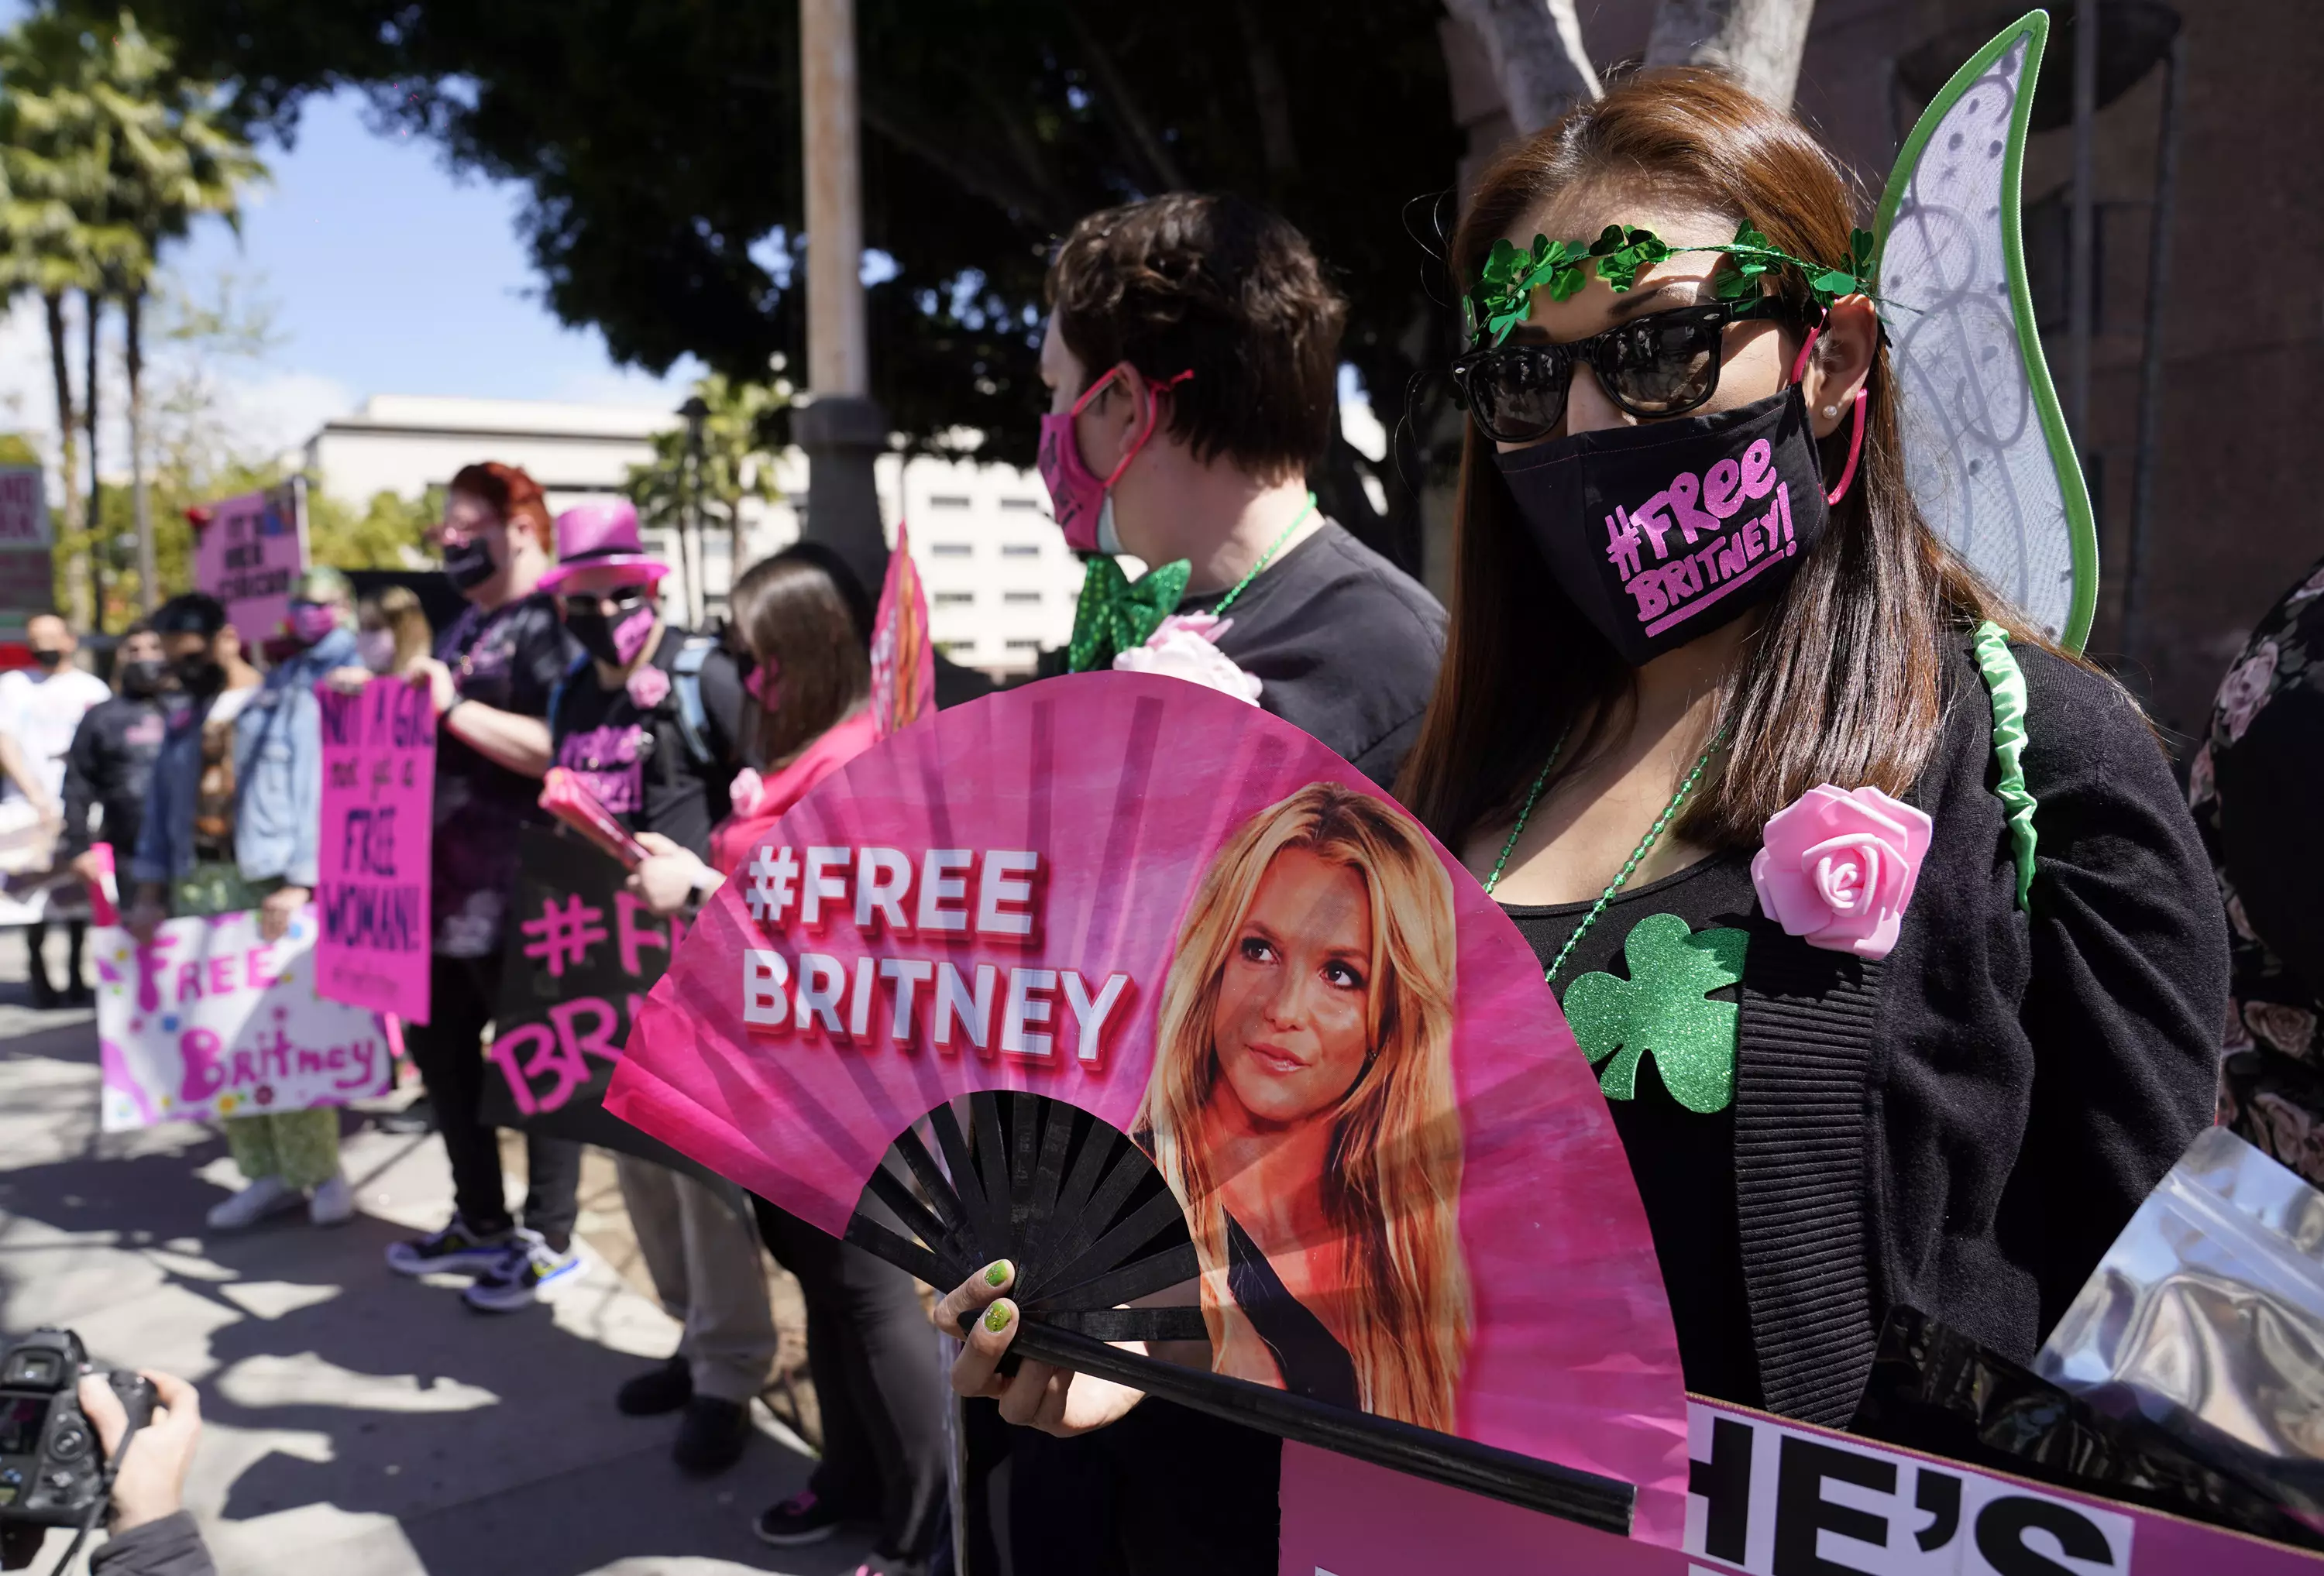 The #FreeBritney movement has gathered a lot of momentum.